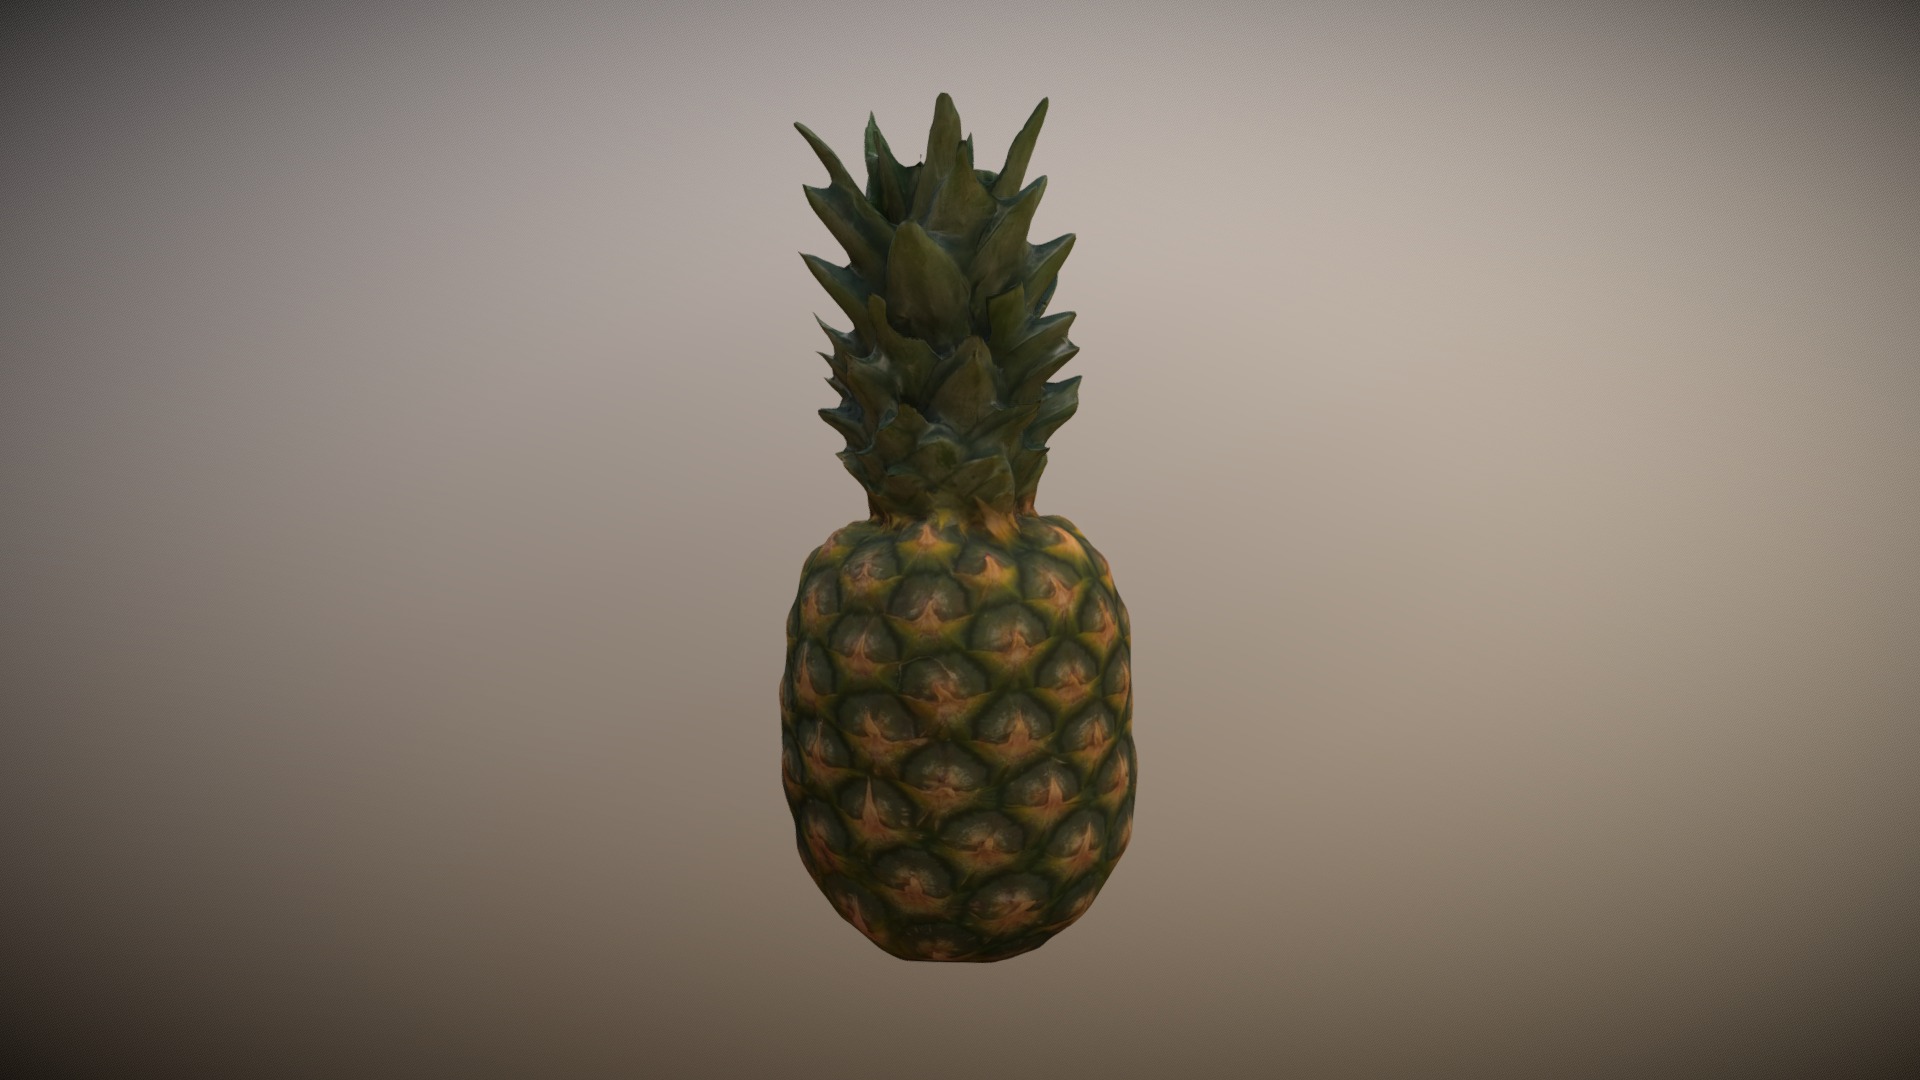 3D model Pineapple (Ananas) Photogrammetry Modell - This is a 3D model of the Pineapple (Ananas) Photogrammetry Modell. The 3D model is about a pineapple on a white surface.